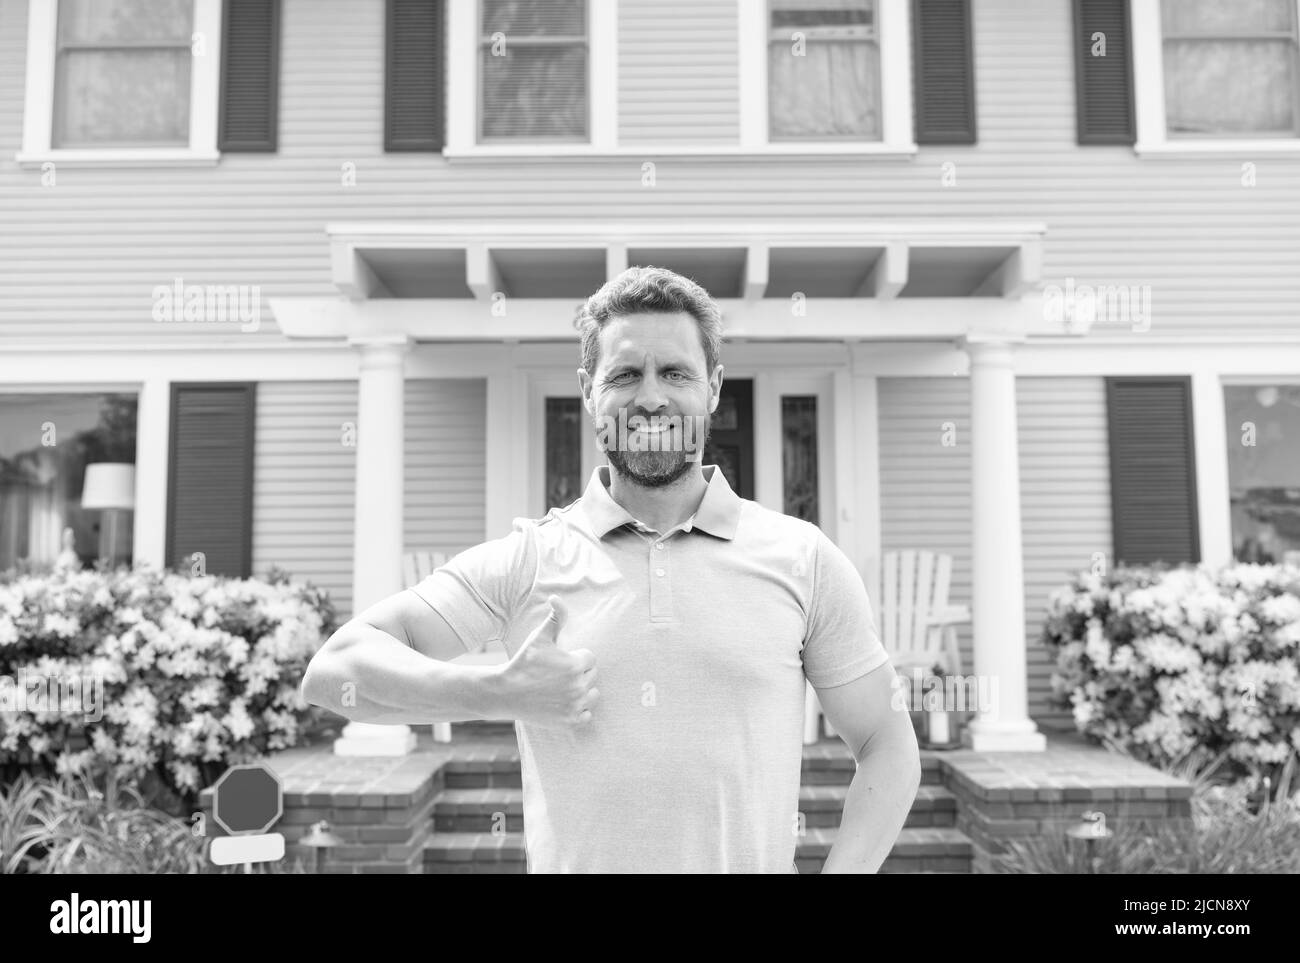 happy owner show thumb up. ownership. confident man outside new american home. Stock Photo